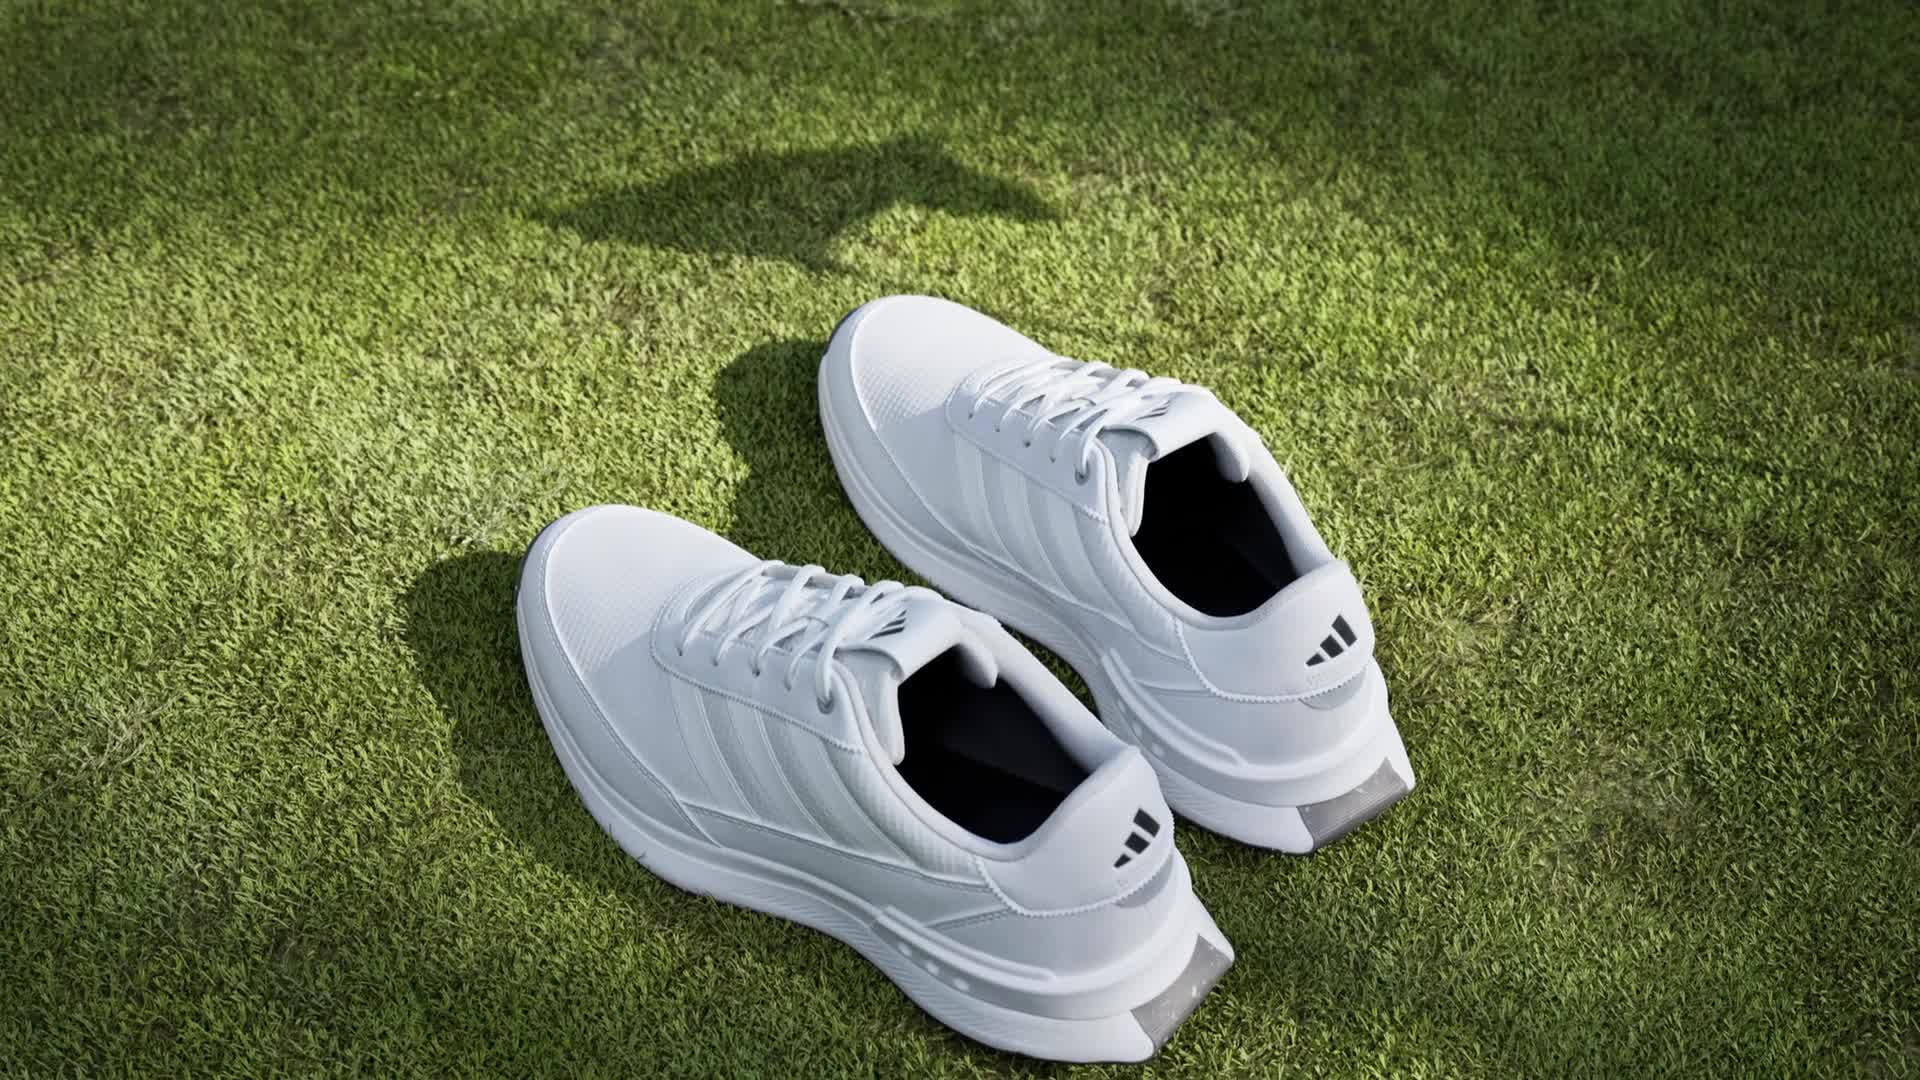 adidas S2G 24 Spikeless Golf Shoes - White | adidas Canada